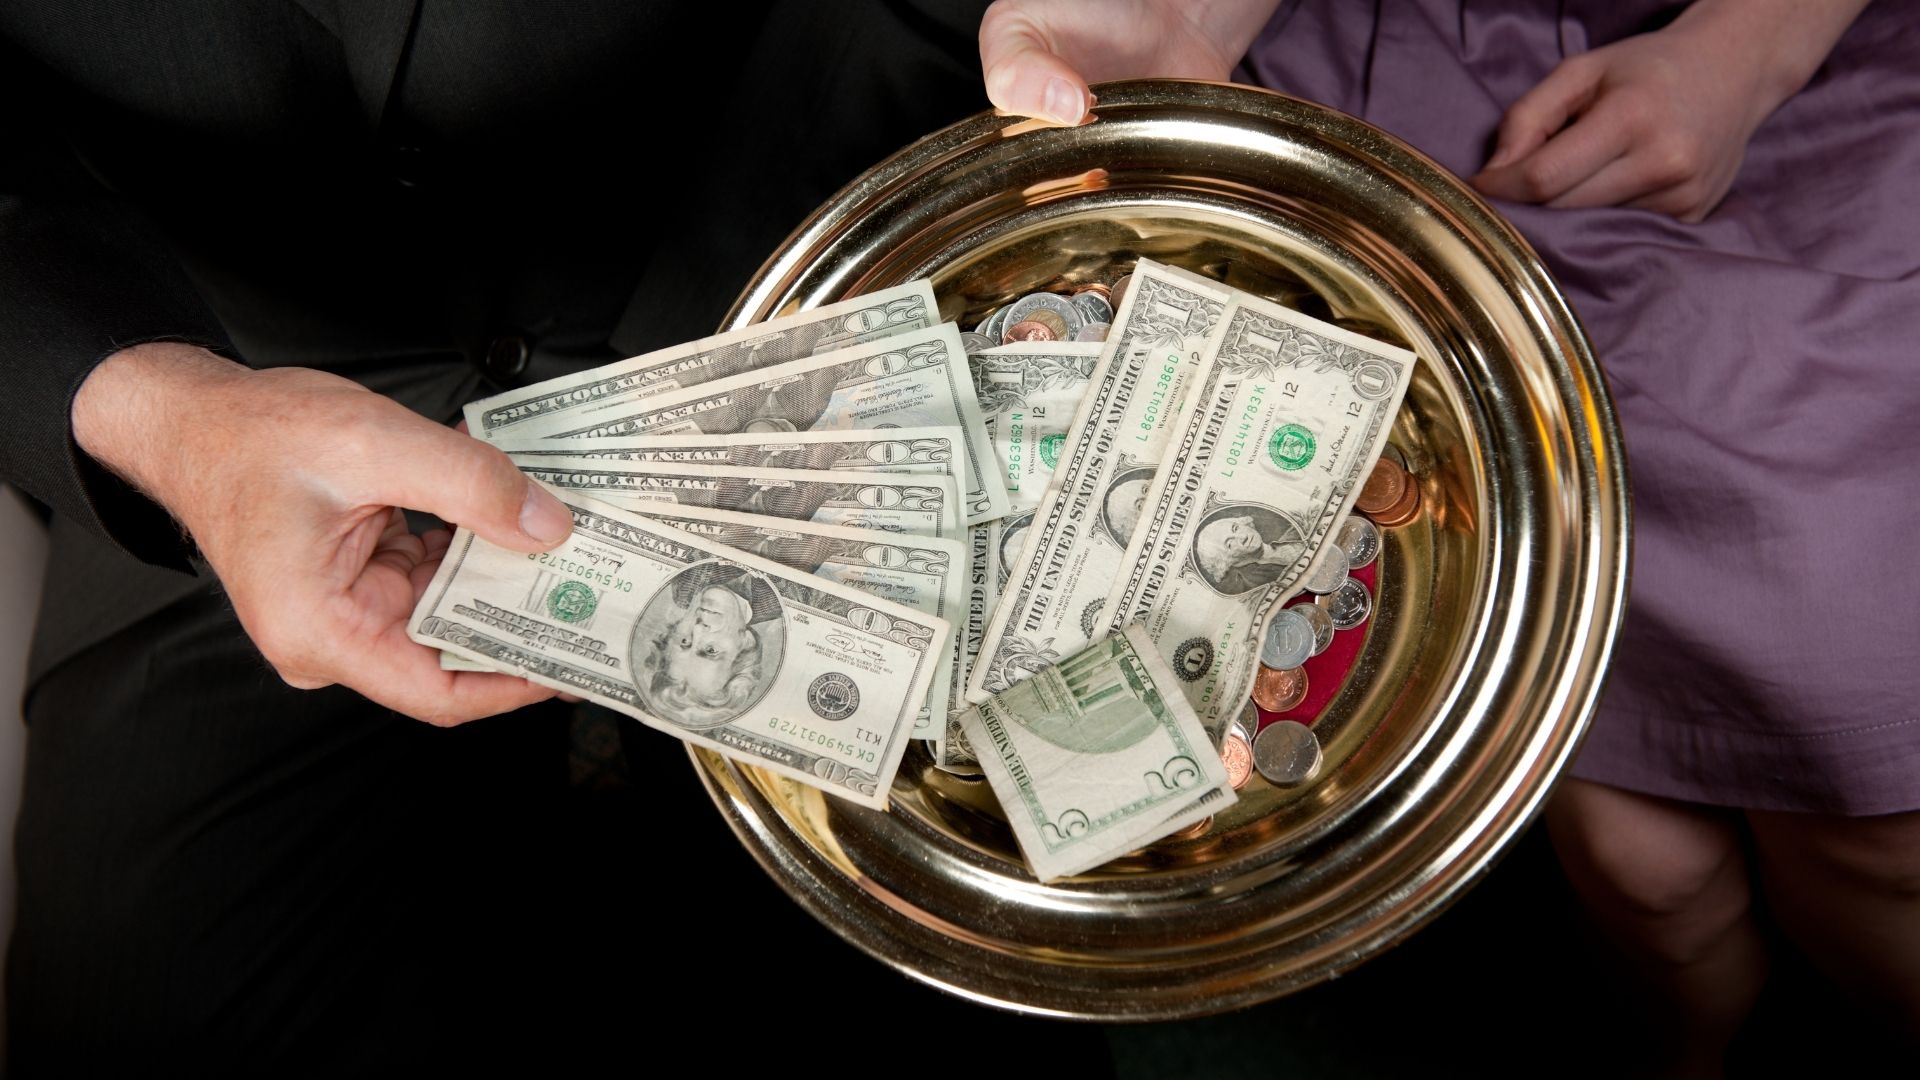 How to increase tithing in church